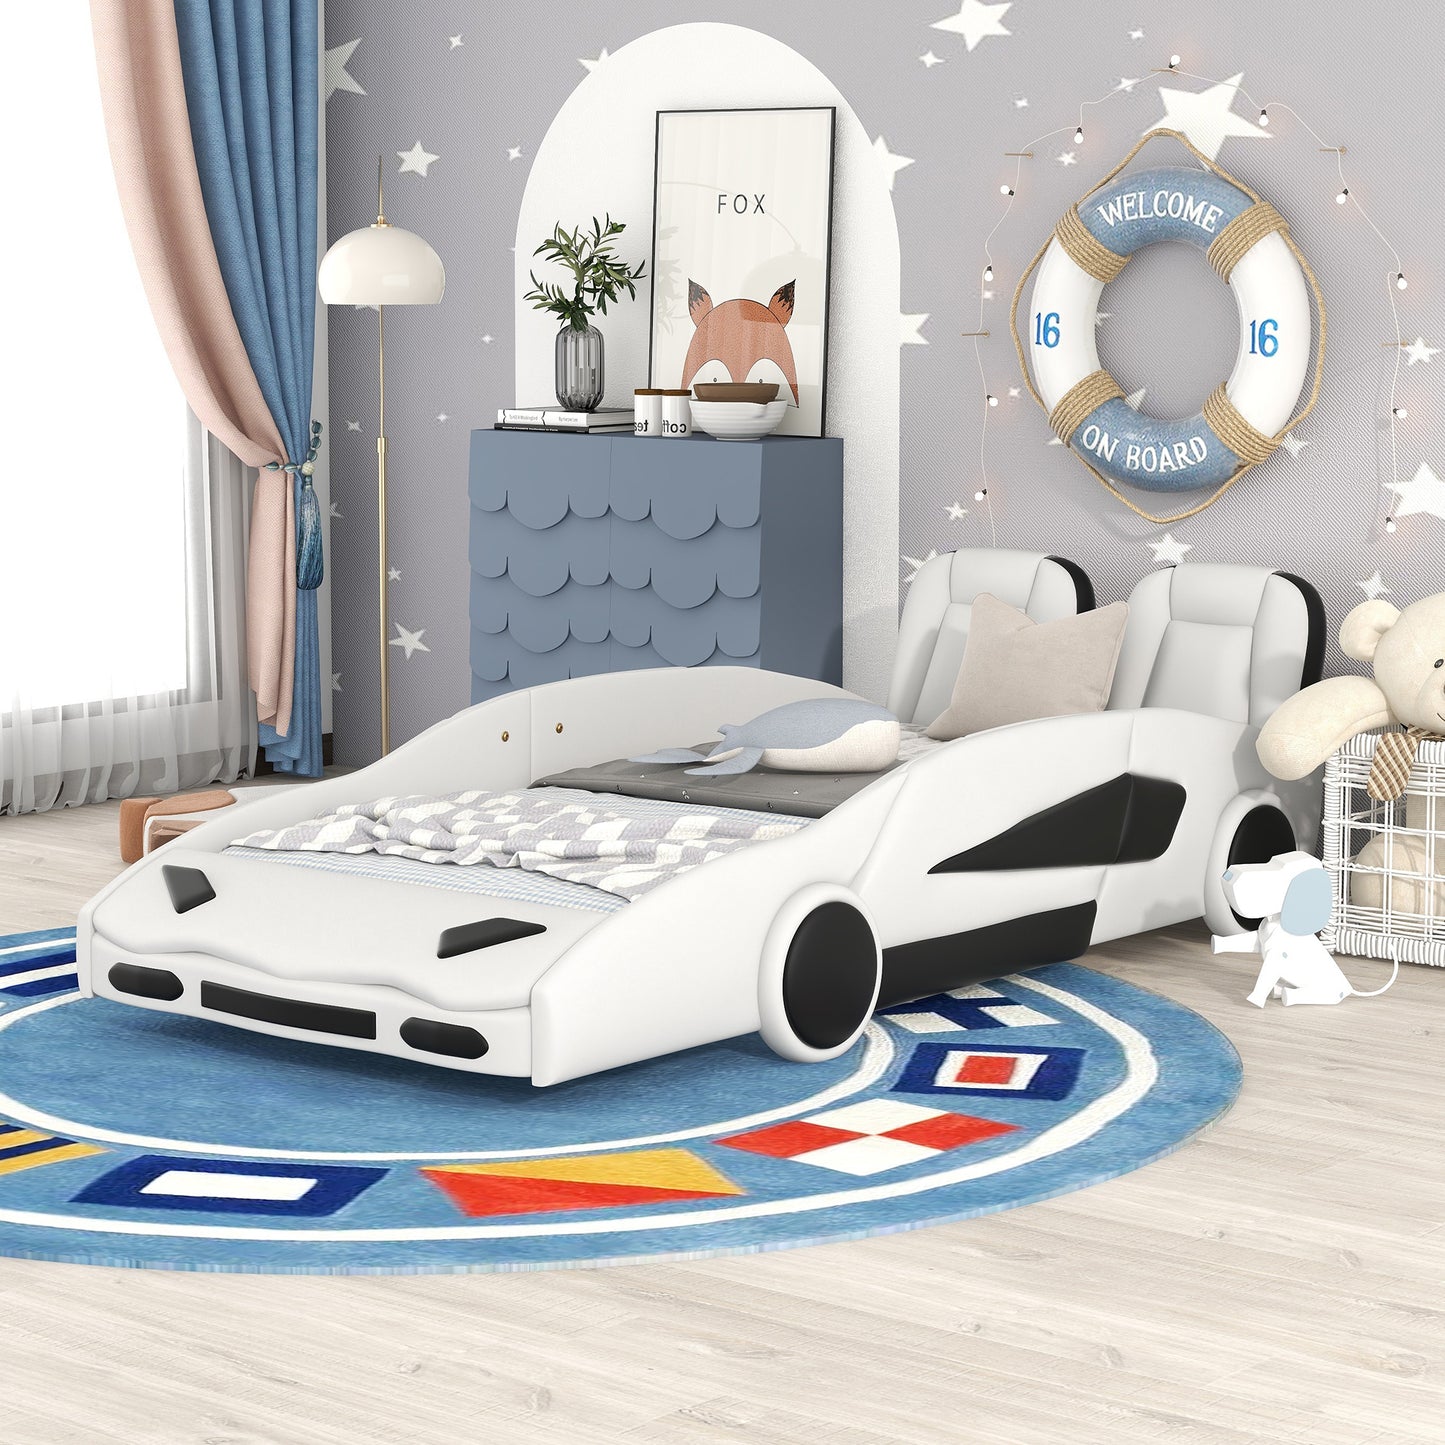 Twin Size Race Car-Shaped Platform Bed with Wheels, White